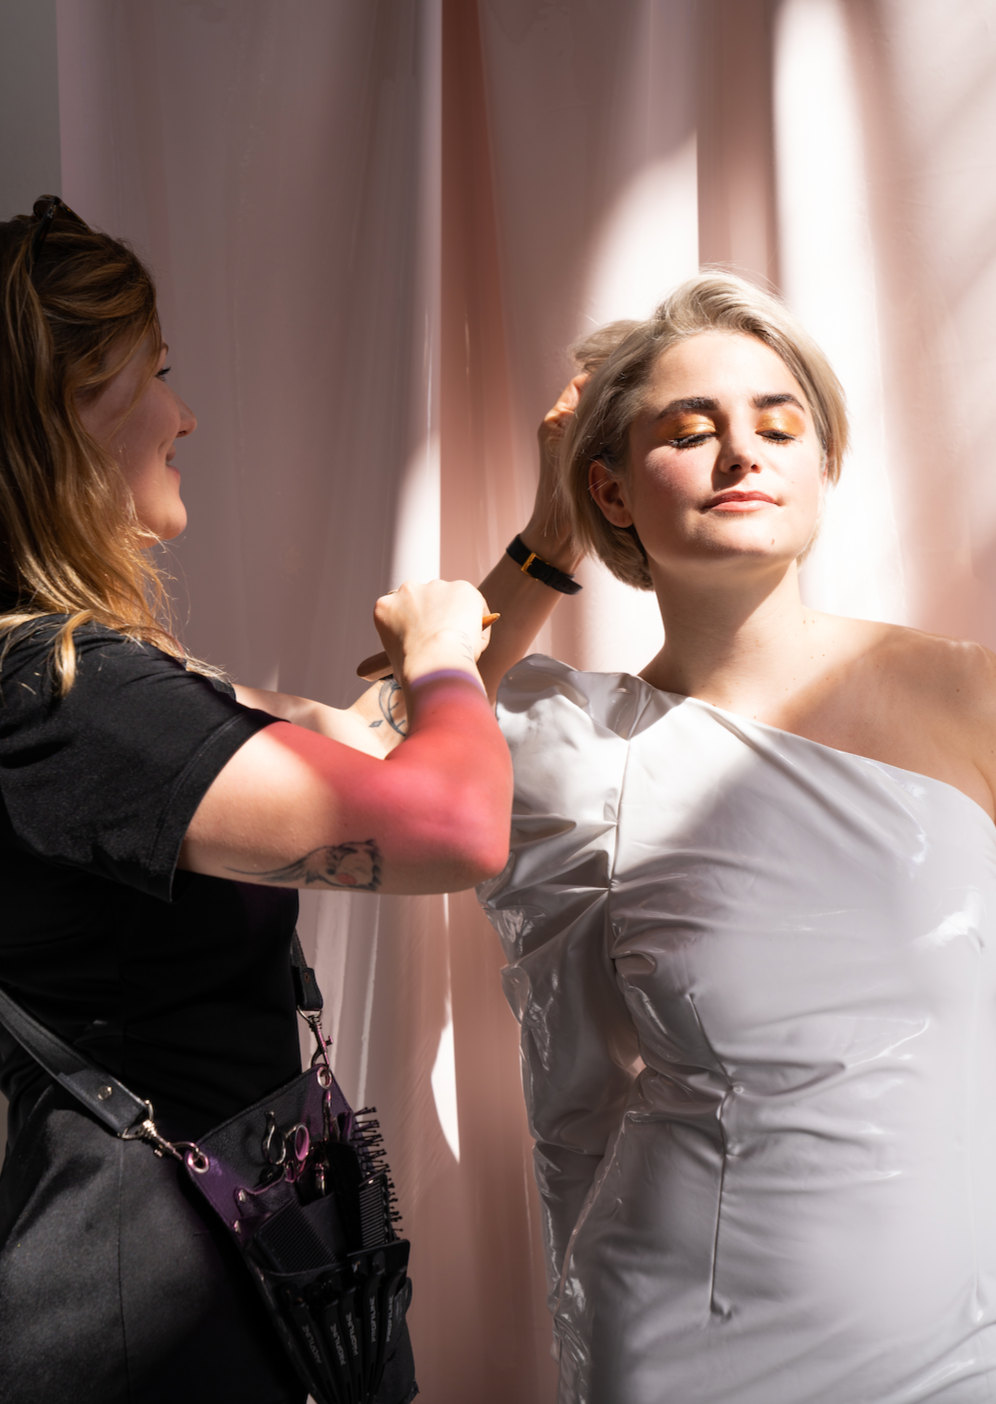 "Time to Shine" Make-Up Workshop - in Berlin, Germany